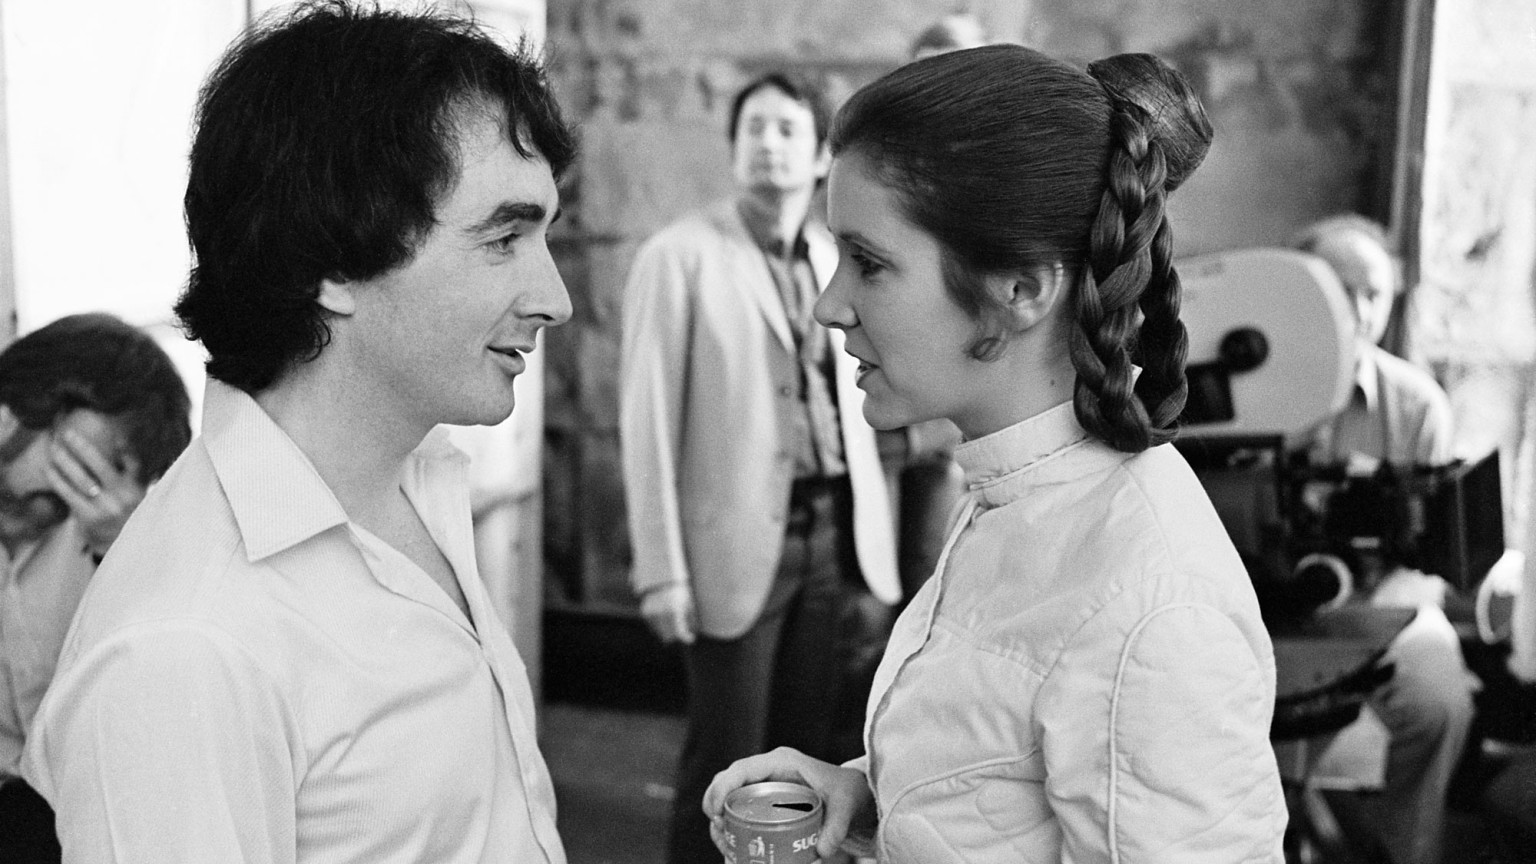 Anthony Daniels & Carrie Fisher on Empire Strikes Back set